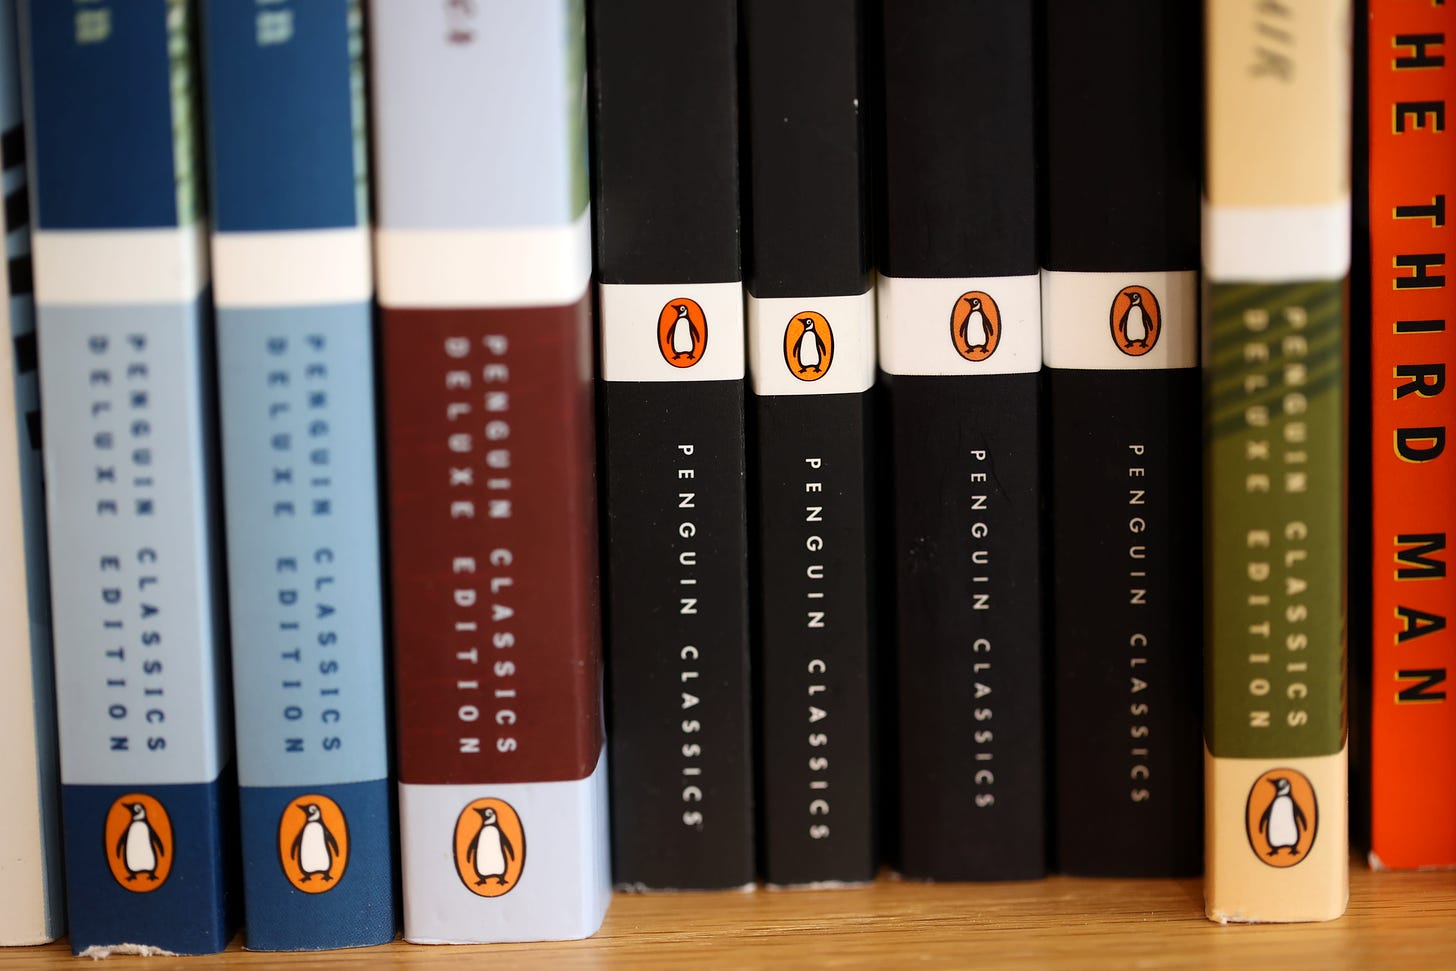 Paramount scraps deal to sell Simon & Schuster to Penguin